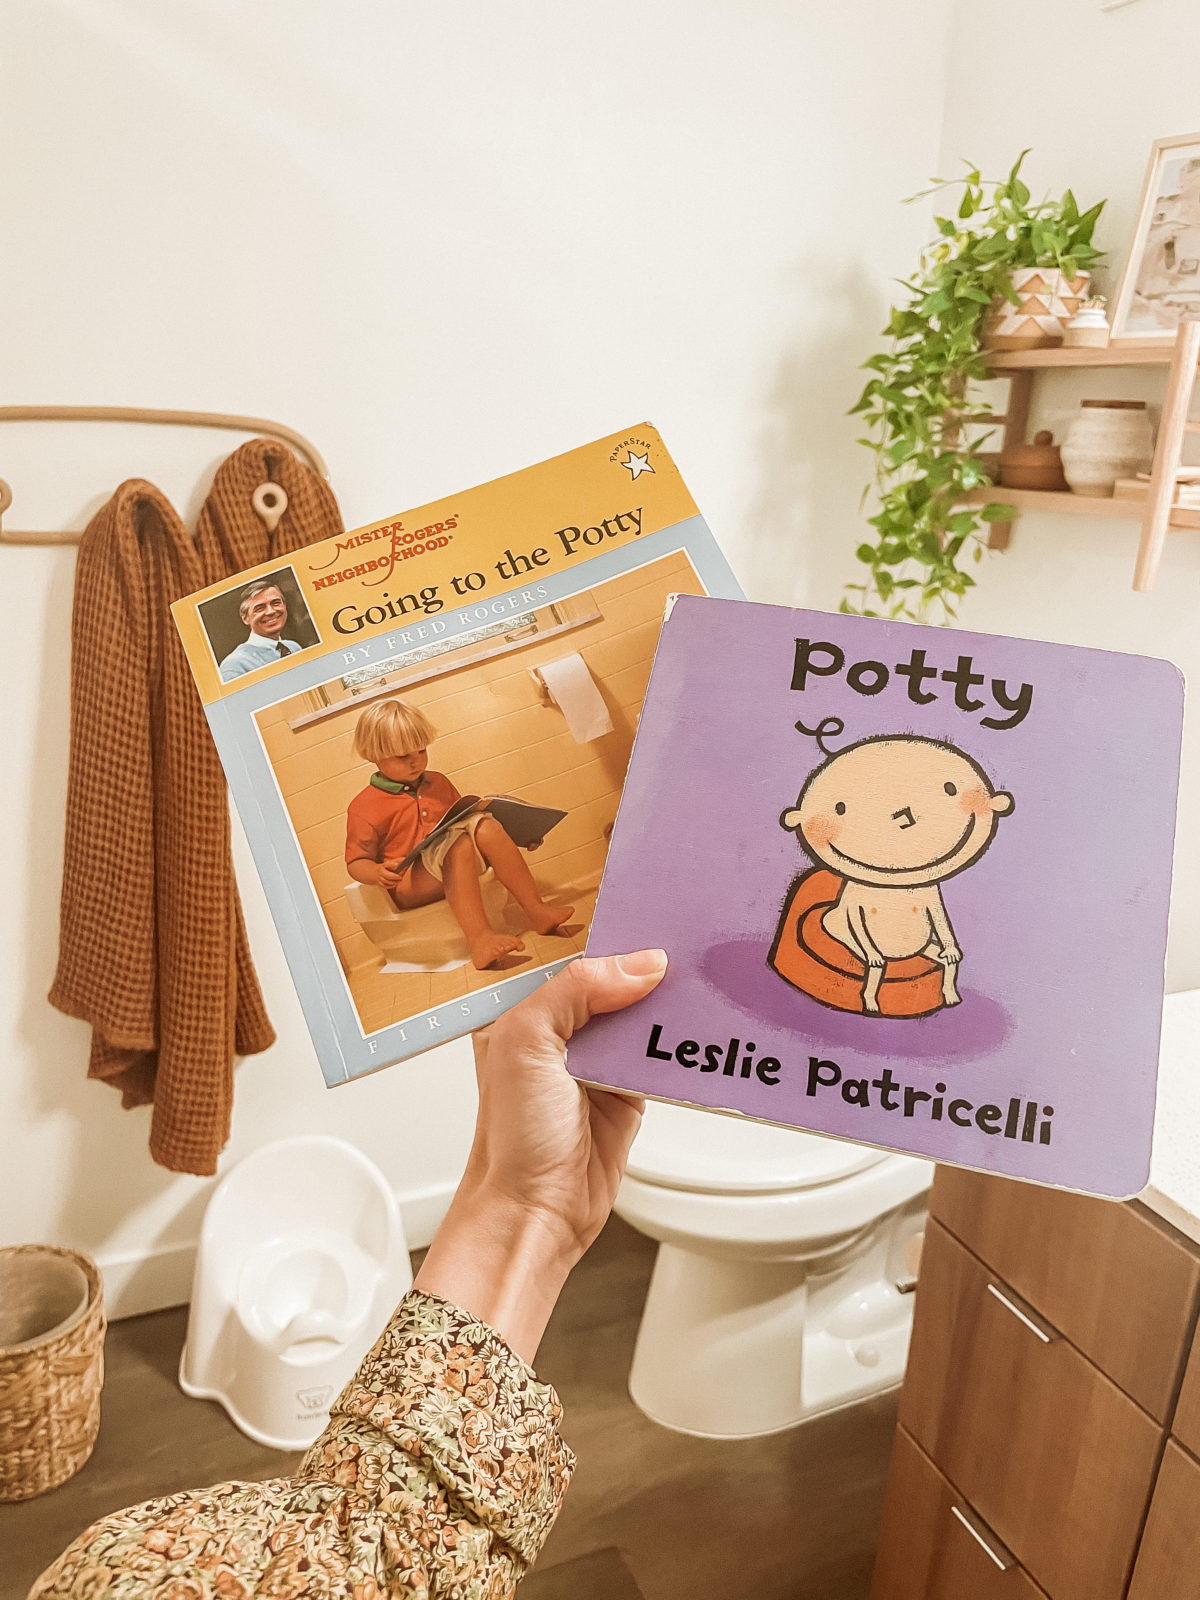 Potty Training The Montessori Way: The Toilet Learning Approach